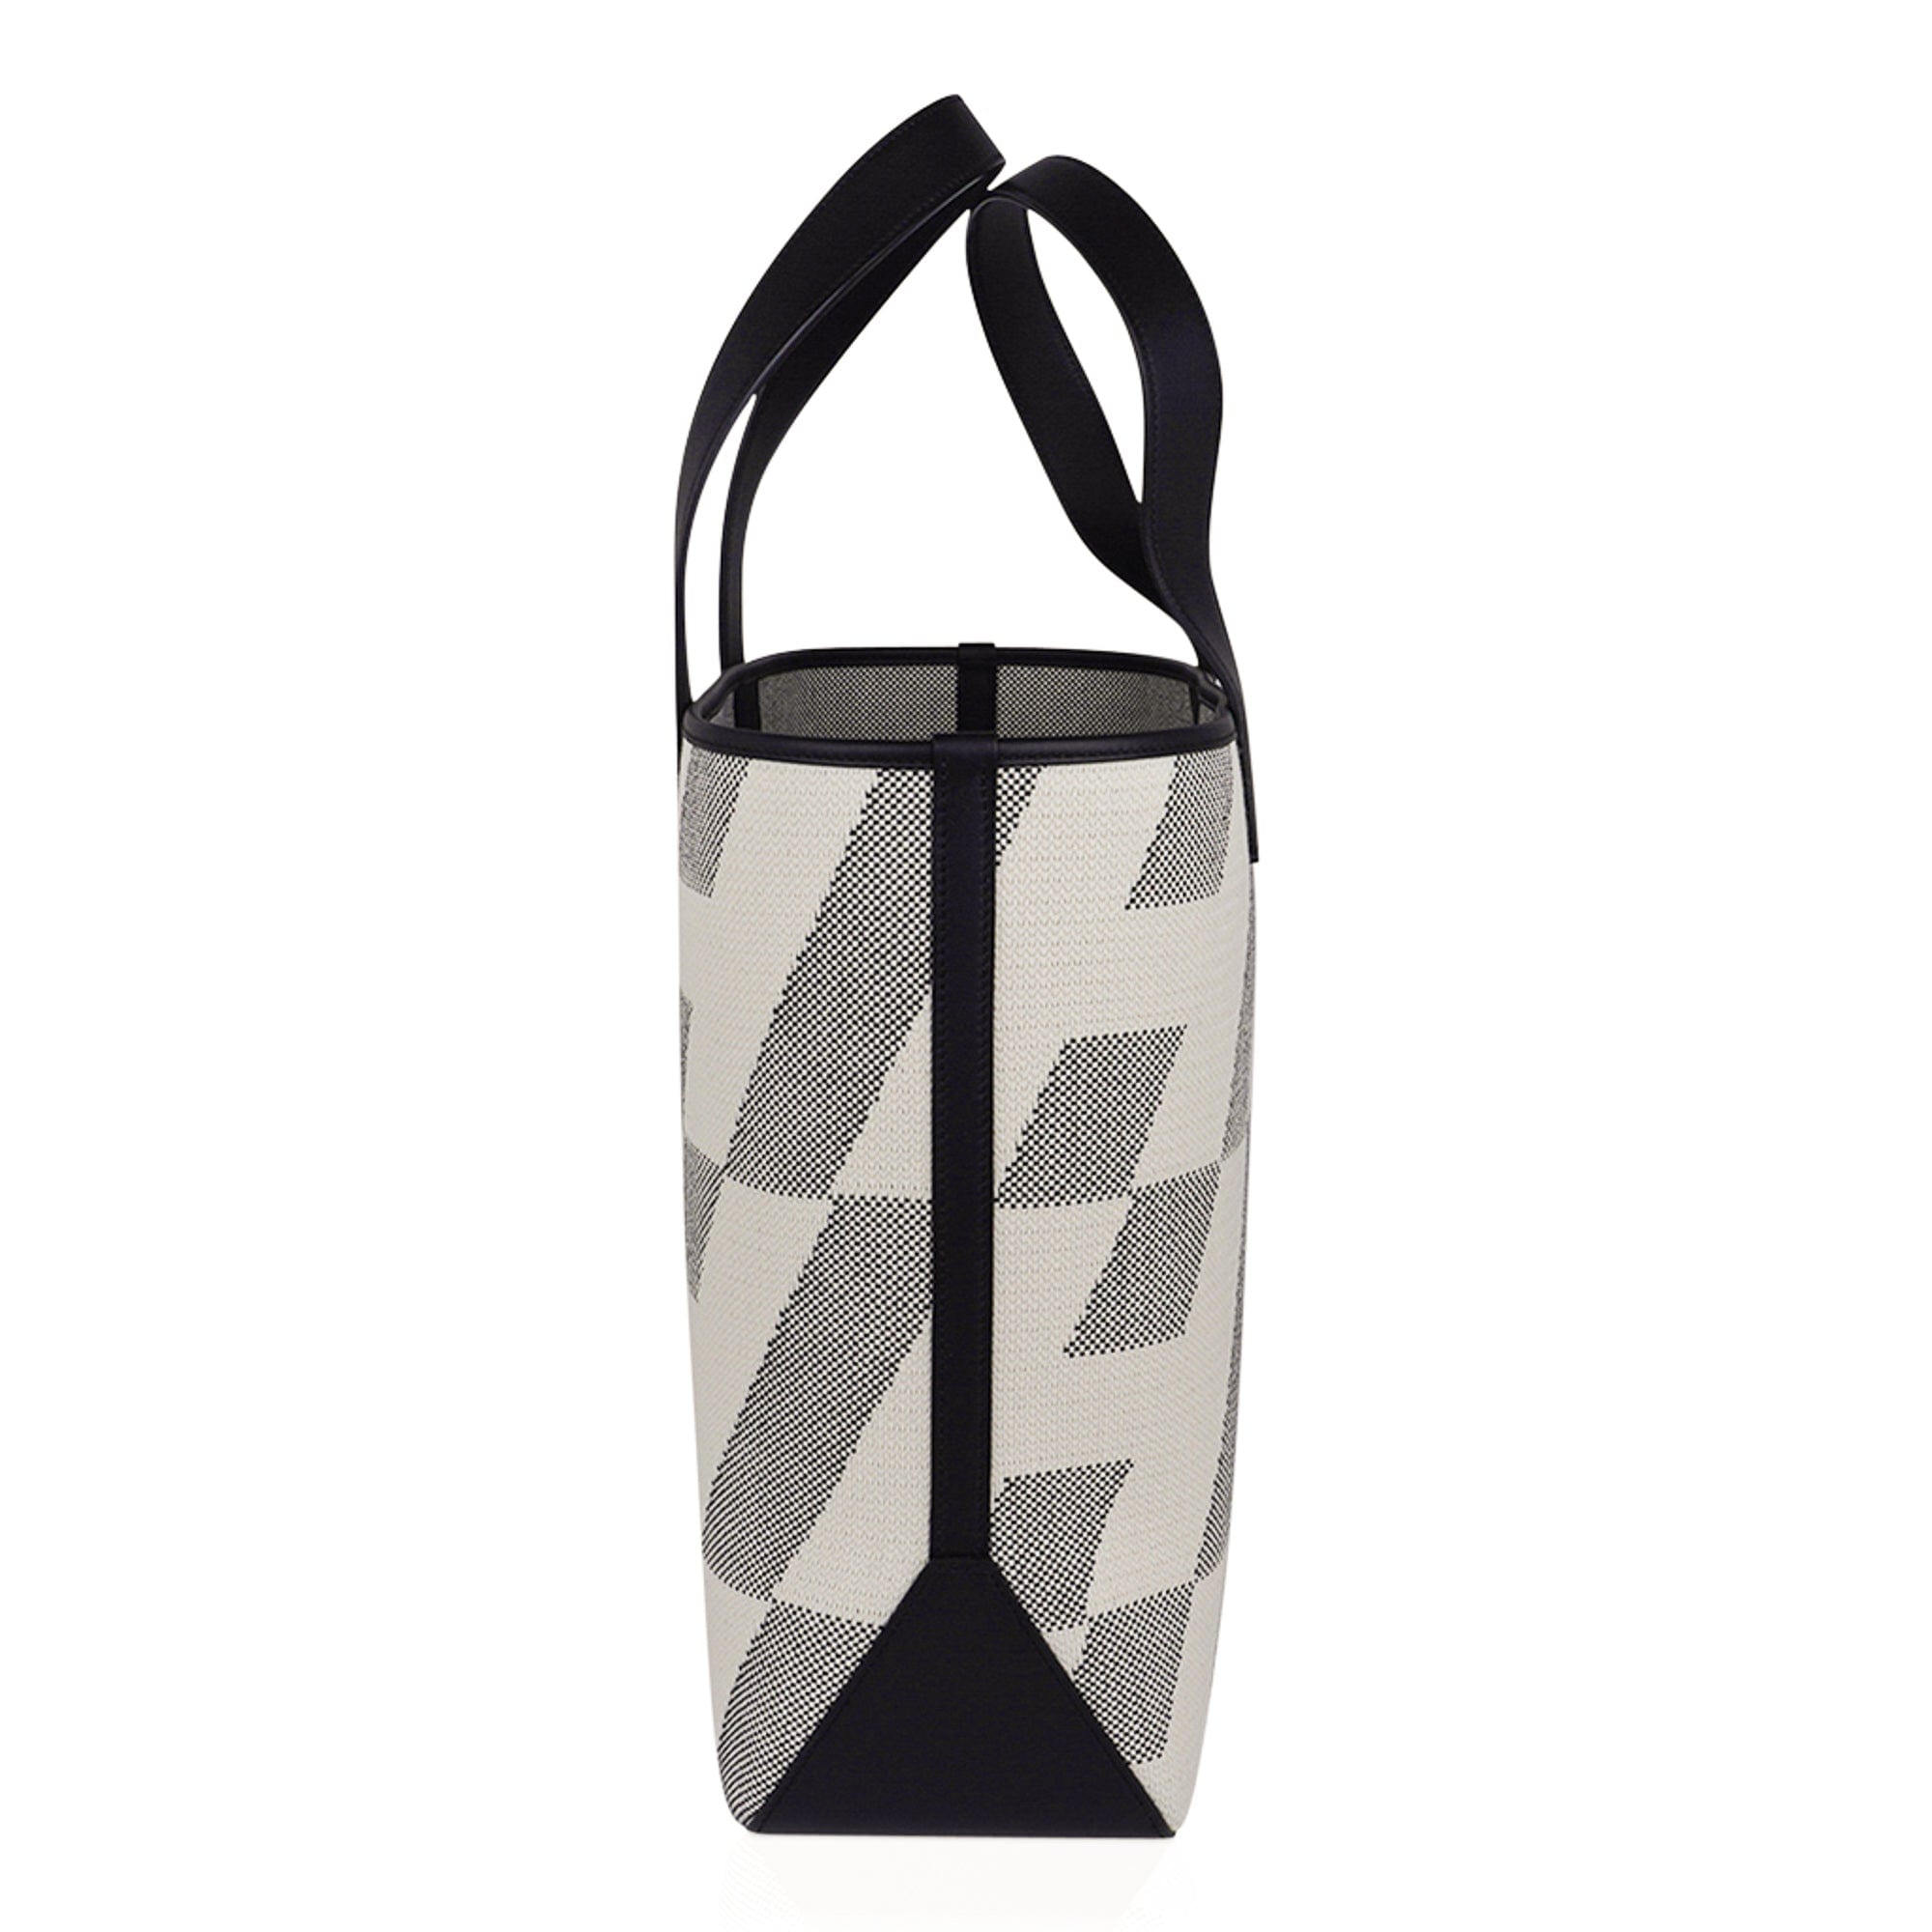 Hermes Black and White Striped Canvas Tote with Pochette